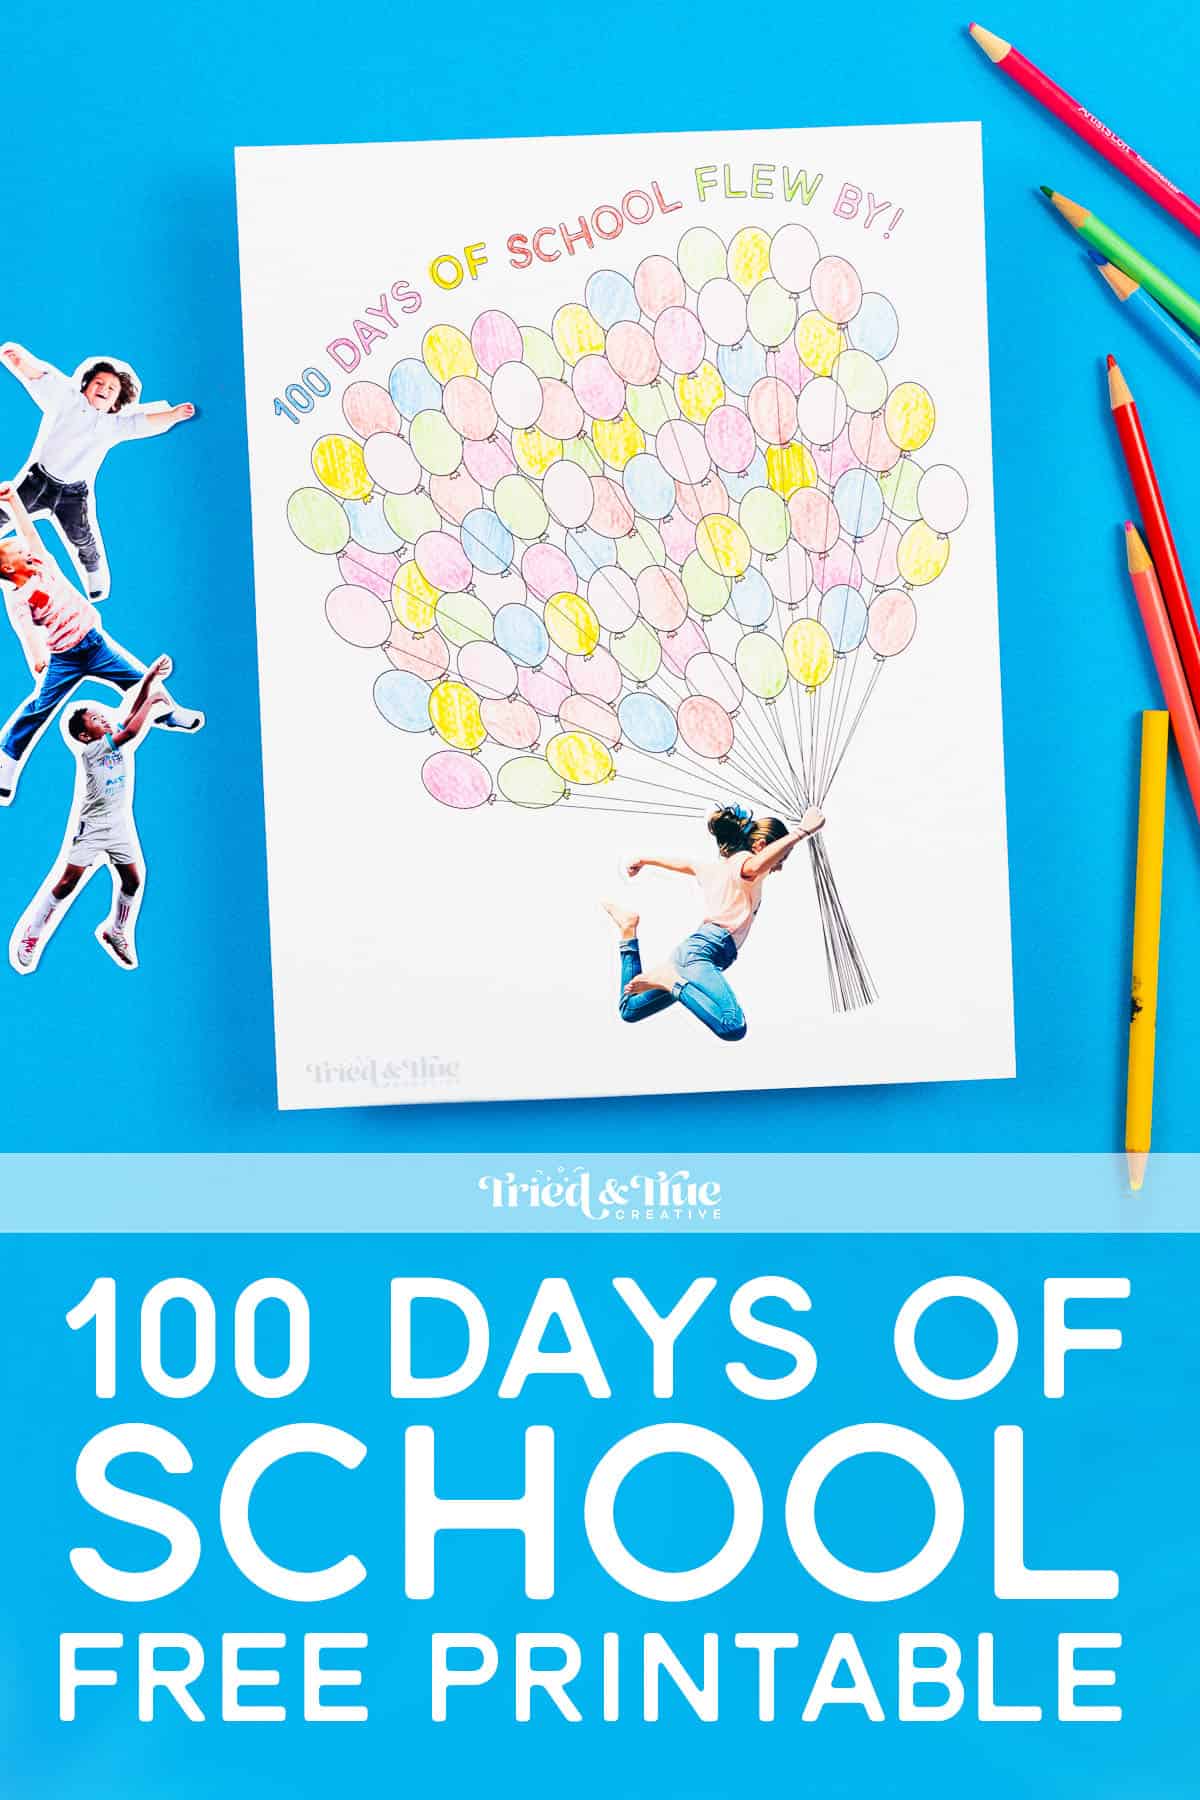 Image of the 100 days of school free printable on a blue background.